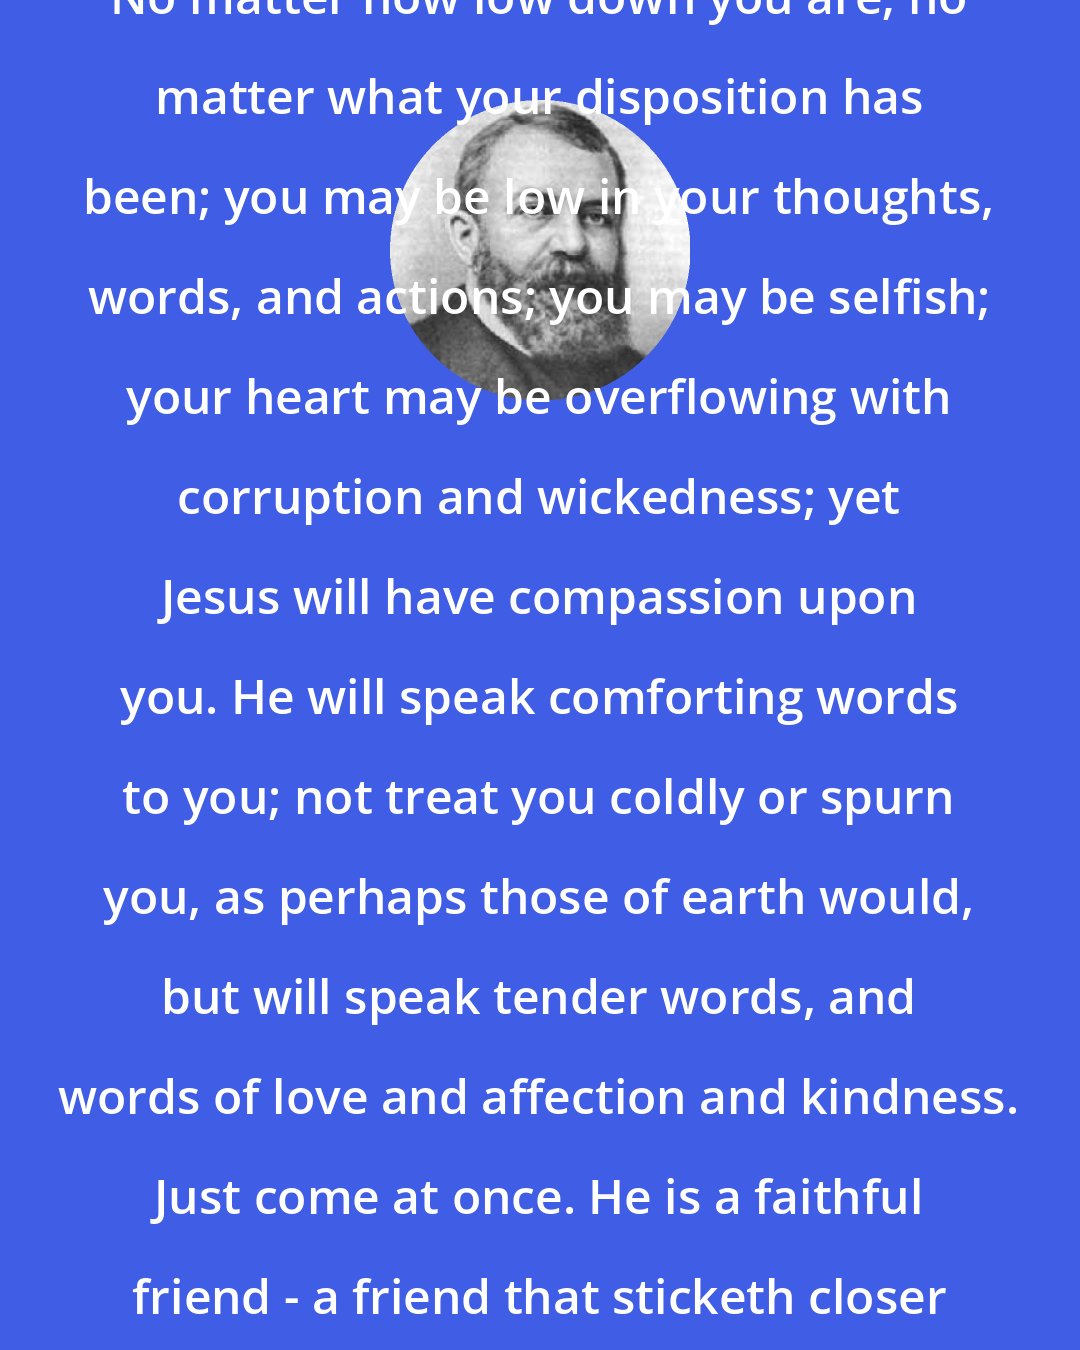 Dwight L. Moody: No matter how low down you are; no matter what your disposition has been; you may be low in your thoughts, words, and actions; you may be selfish; your heart may be overflowing with corruption and wickedness; yet Jesus will have compassion upon you. He will speak comforting words to you; not treat you coldly or spurn you, as perhaps those of earth would, but will speak tender words, and words of love and affection and kindness. Just come at once. He is a faithful friend - a friend that sticketh closer than a brother.